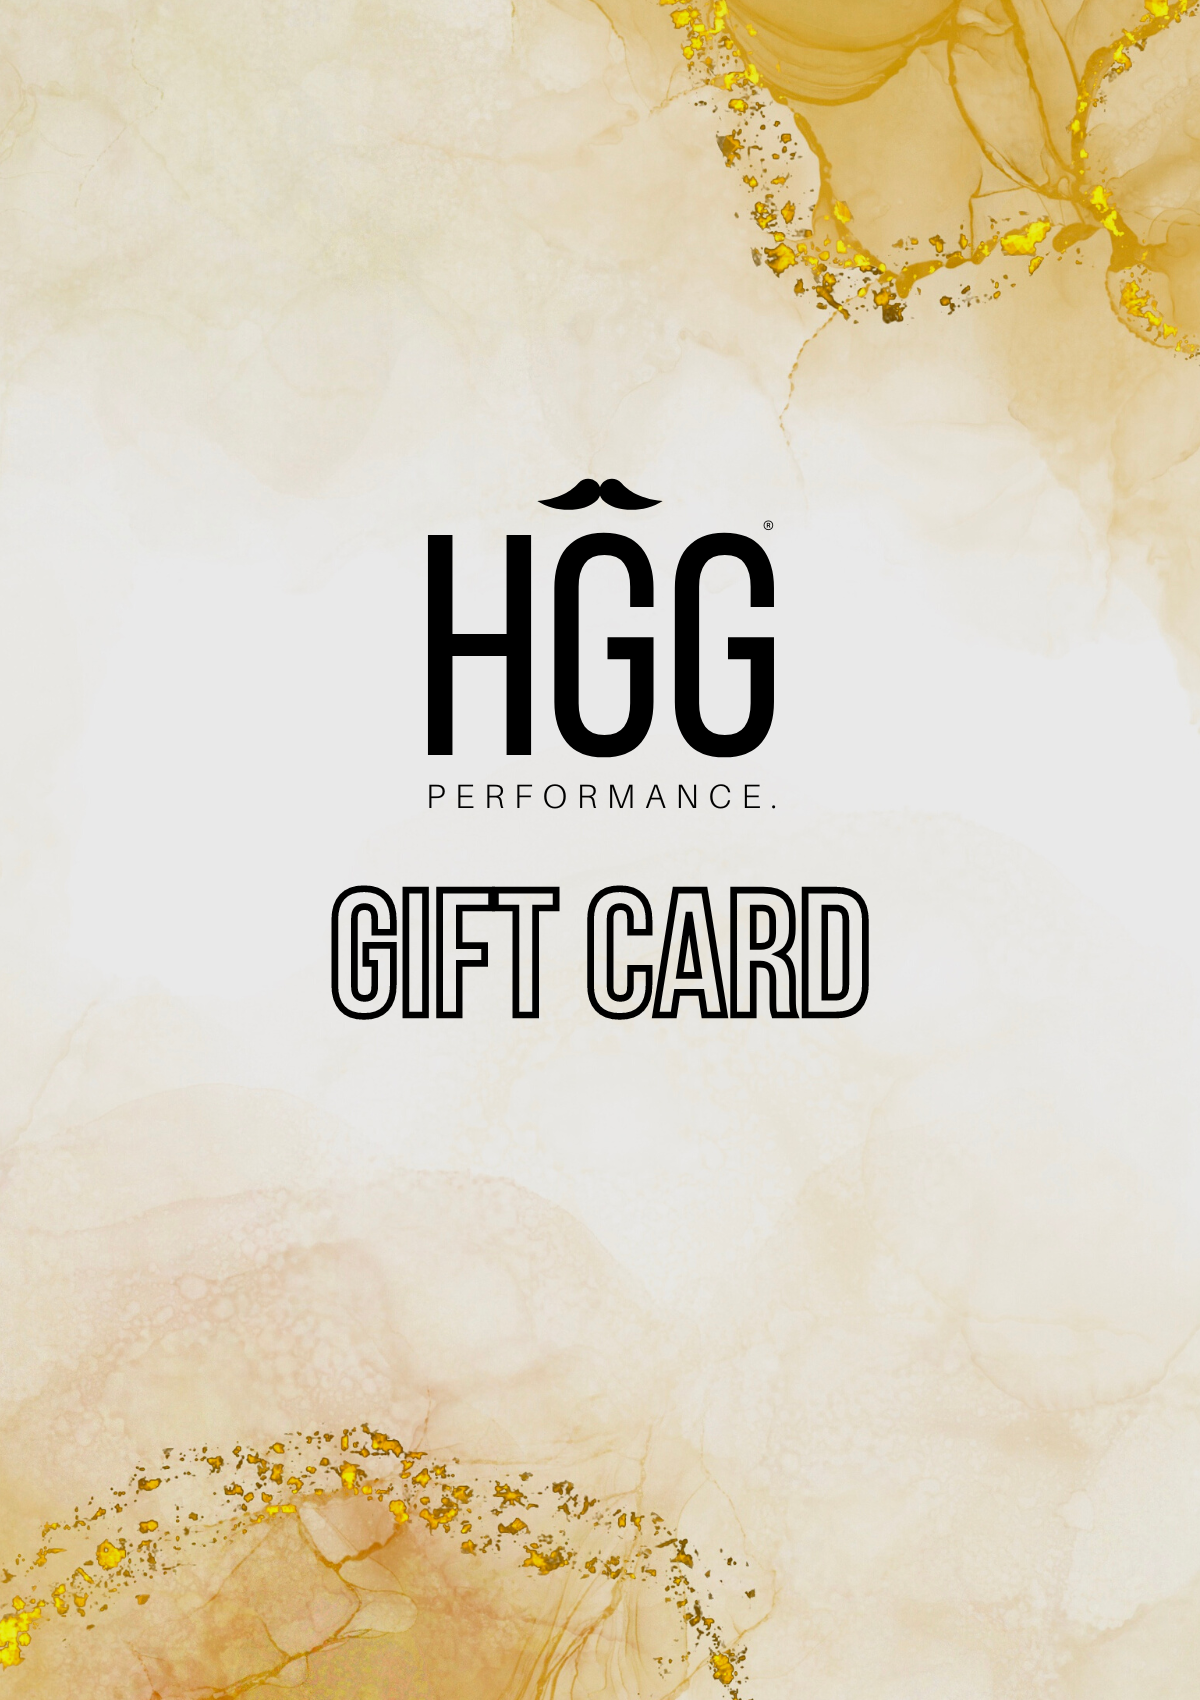 HGG PERFORMANCE GIFT CARD